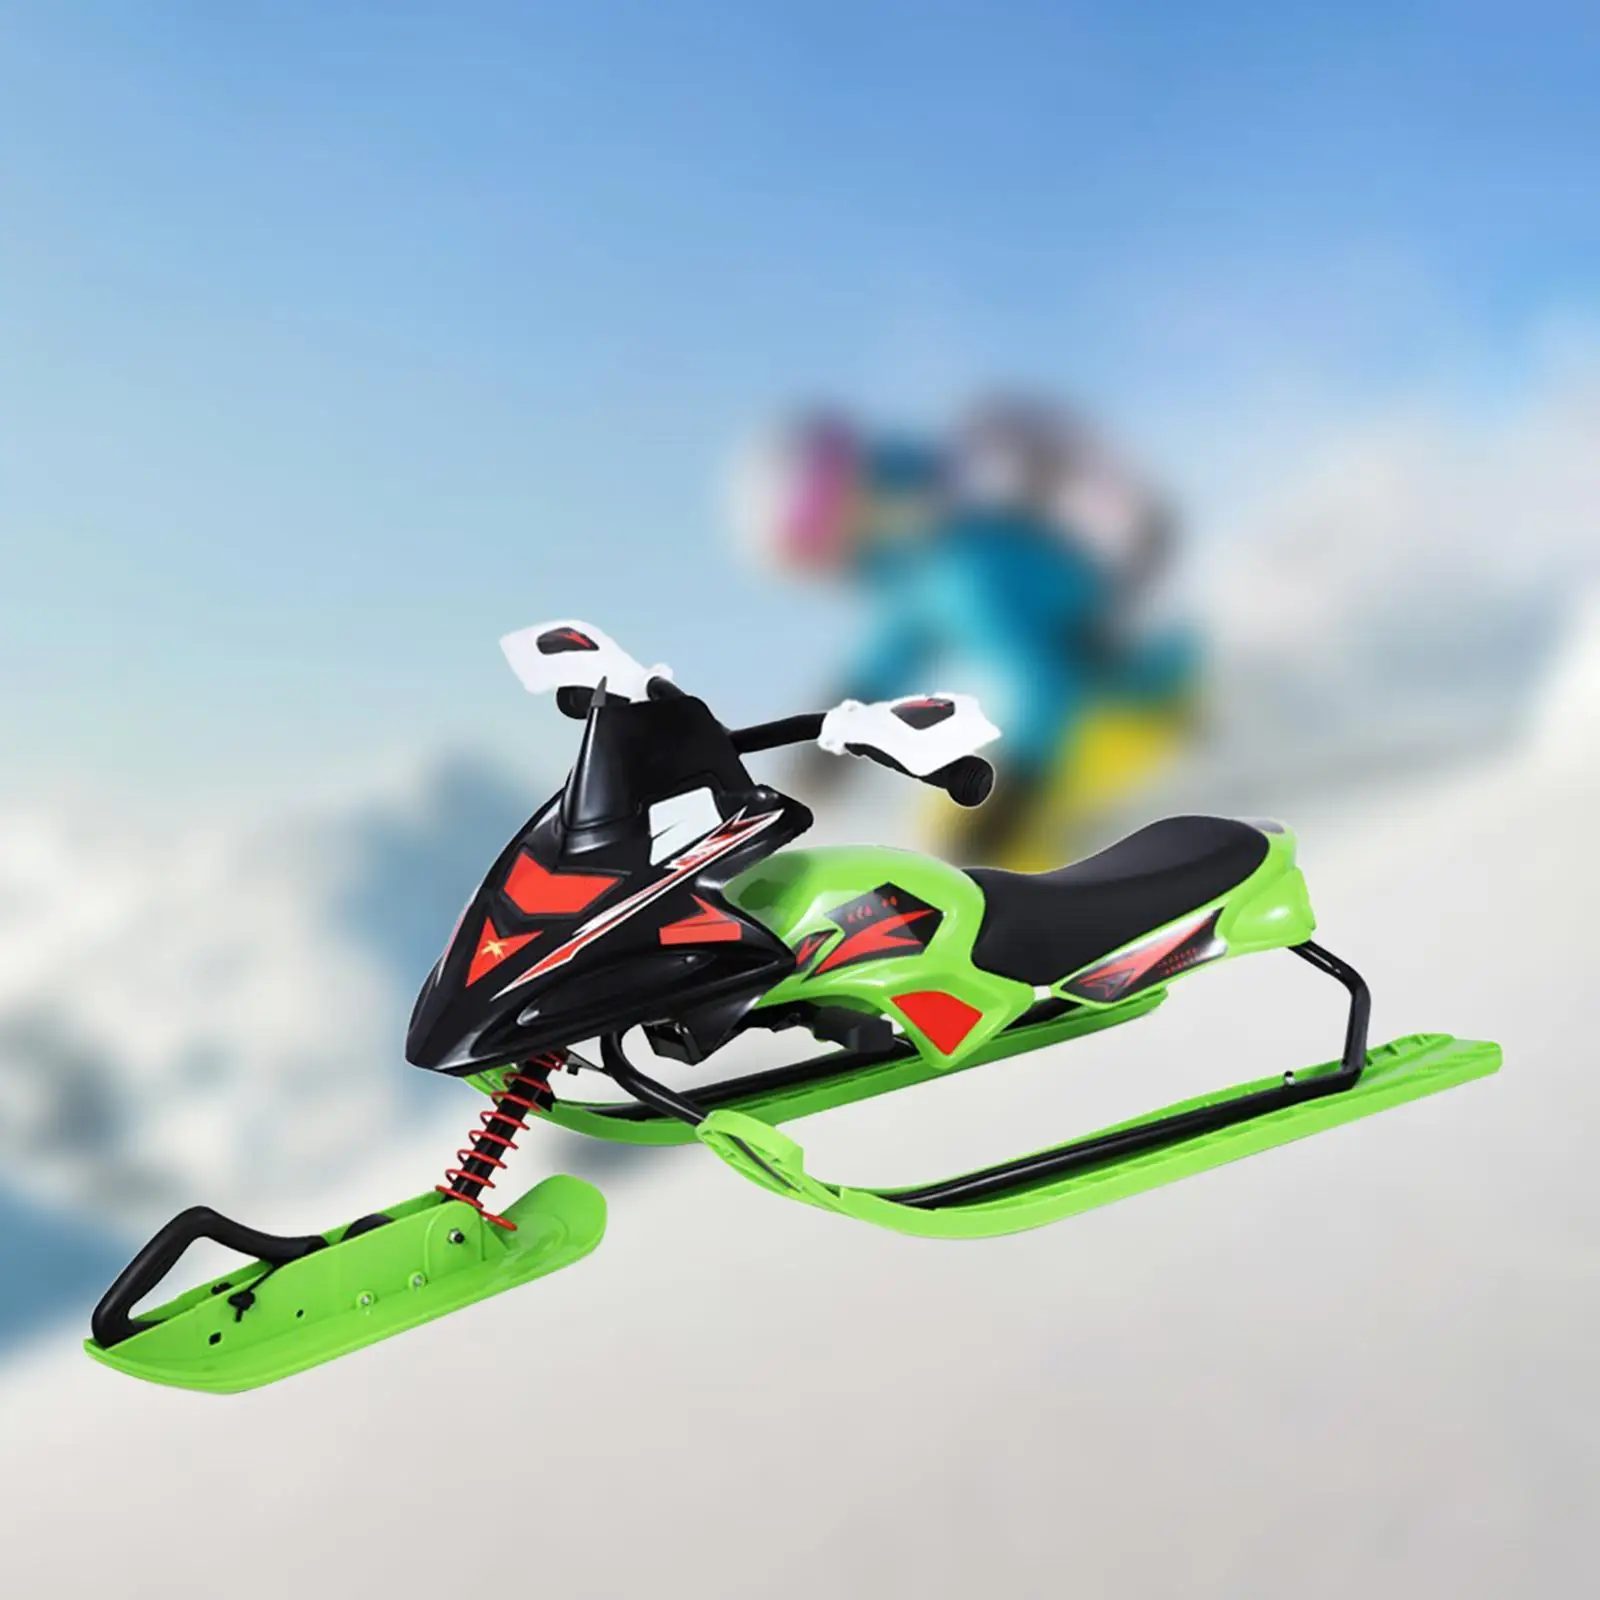 Snow Racer with Steering Wheel Brakes Ski Sled Sleigh for Outdoor Activities